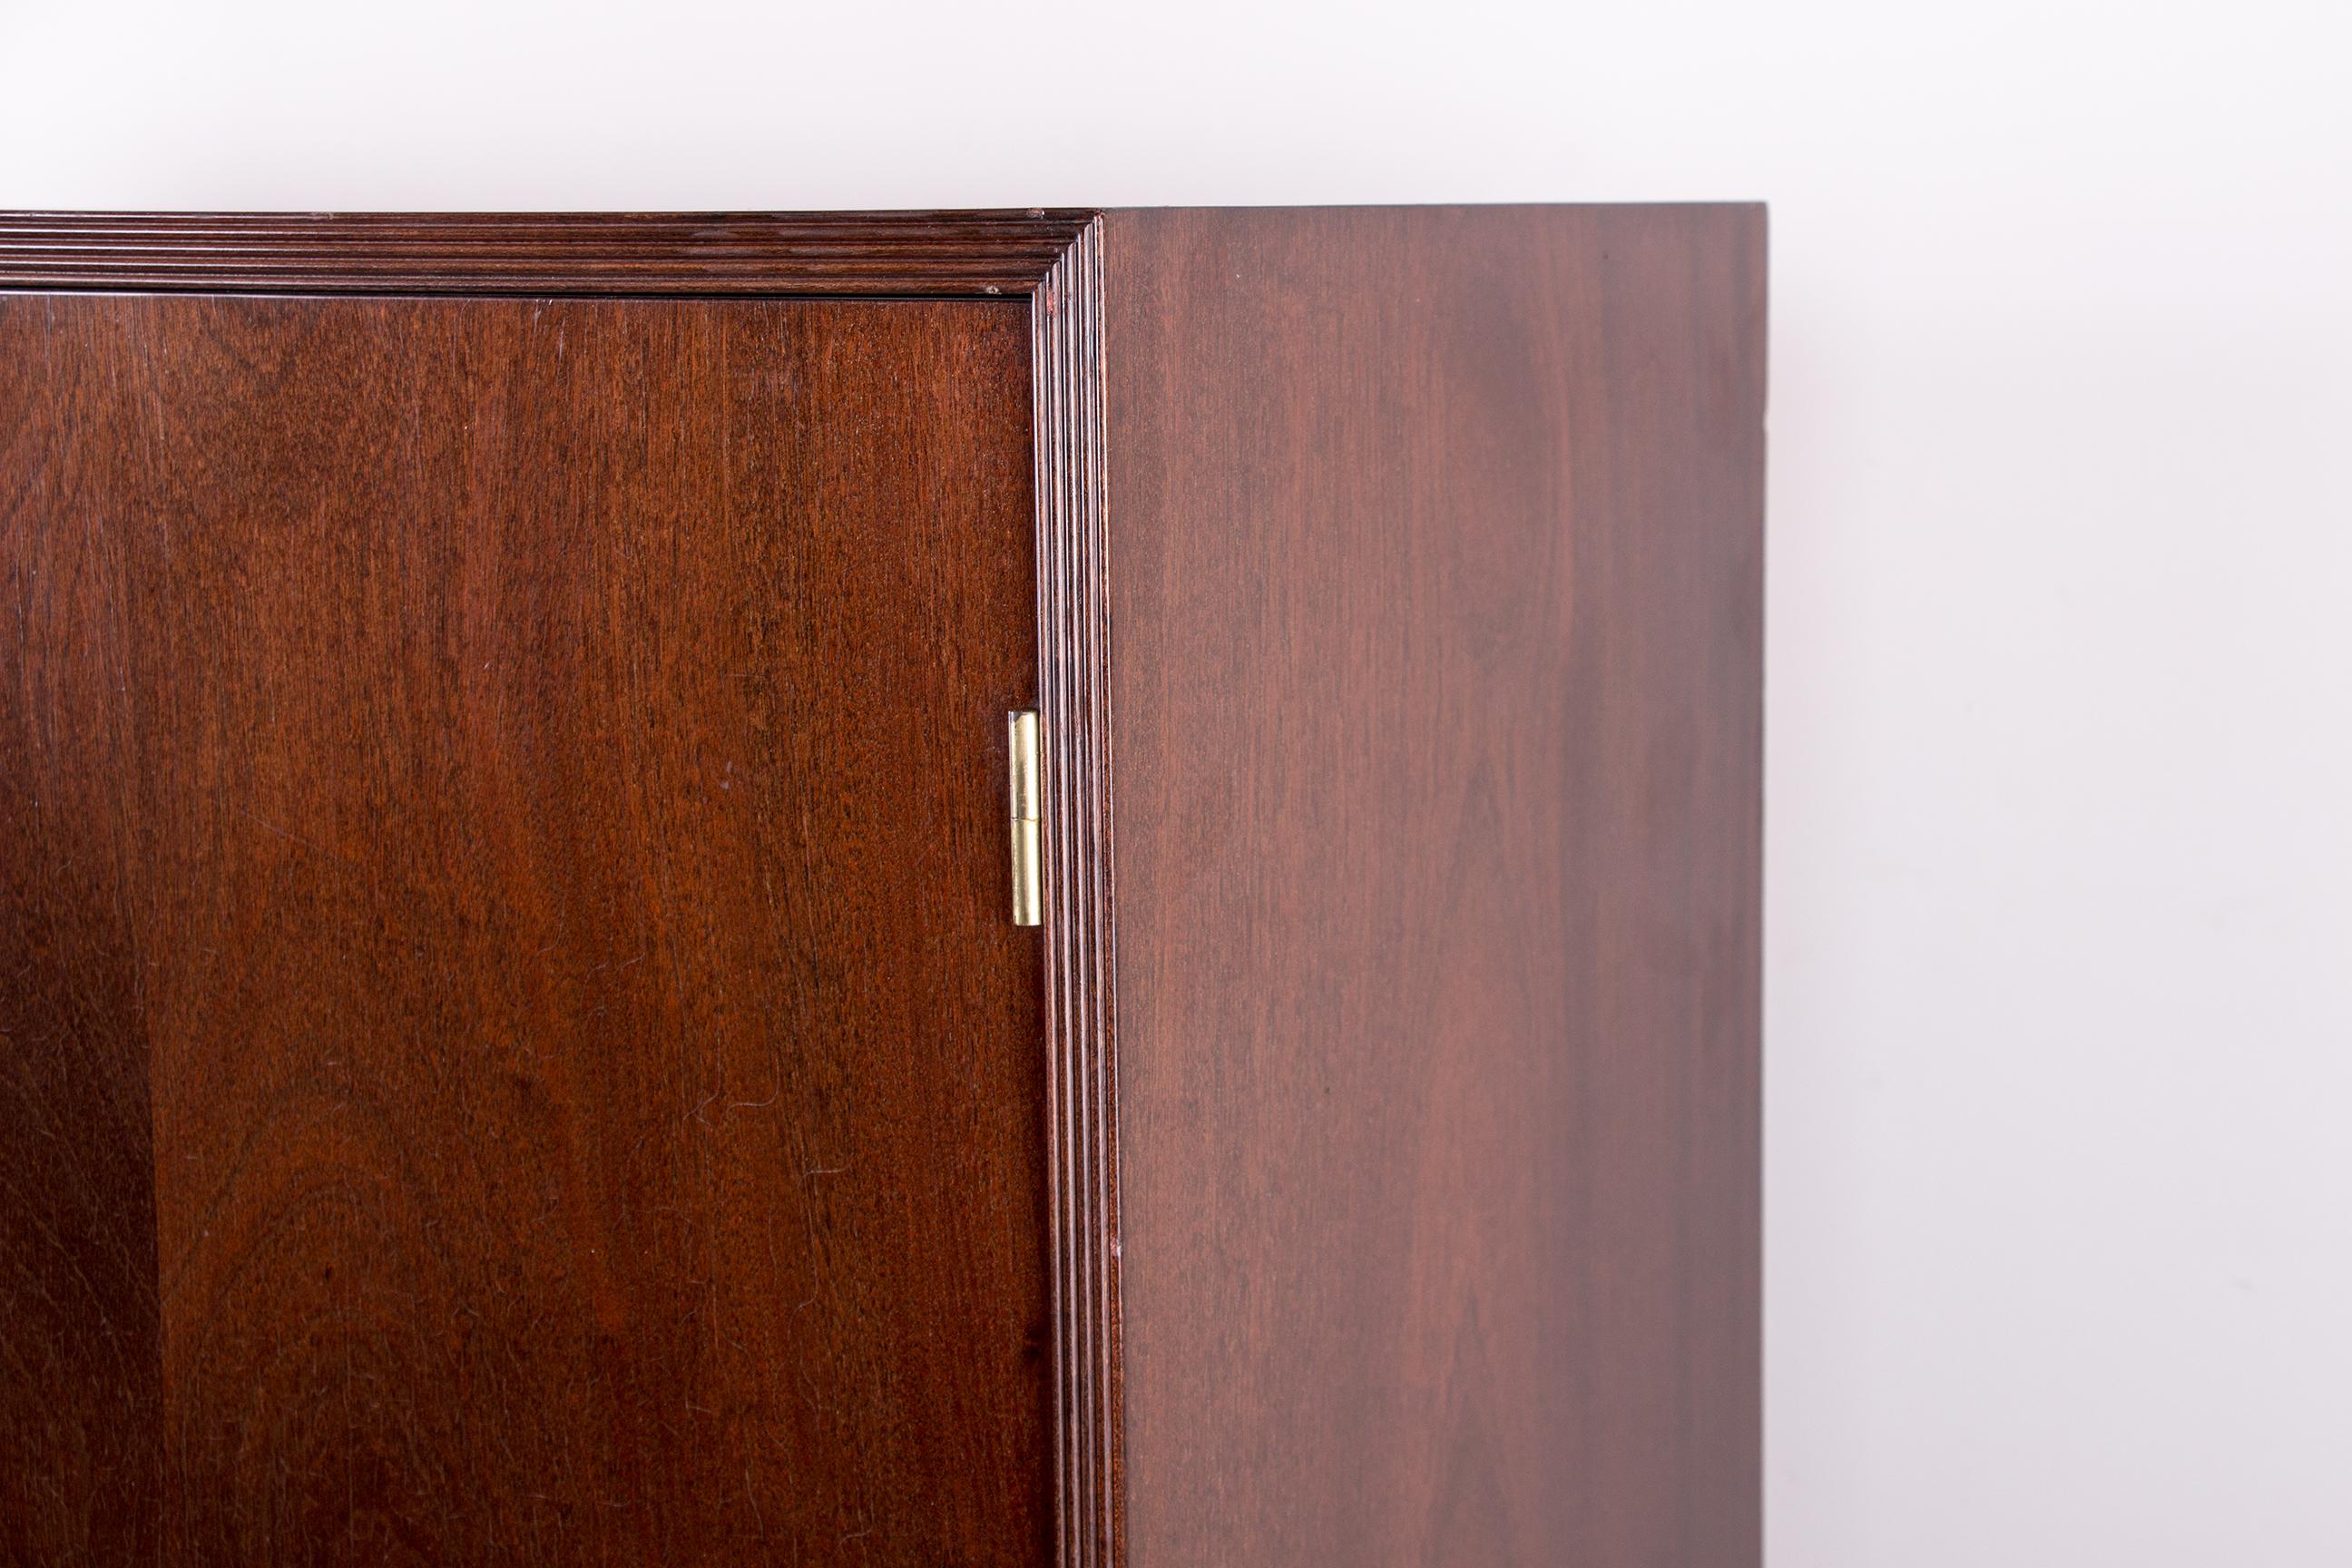 Scandinavian Modern High Danish Cabinet in Mahogany and Brass by Ole Wanscher for Poul Jeppesen 1960 For Sale